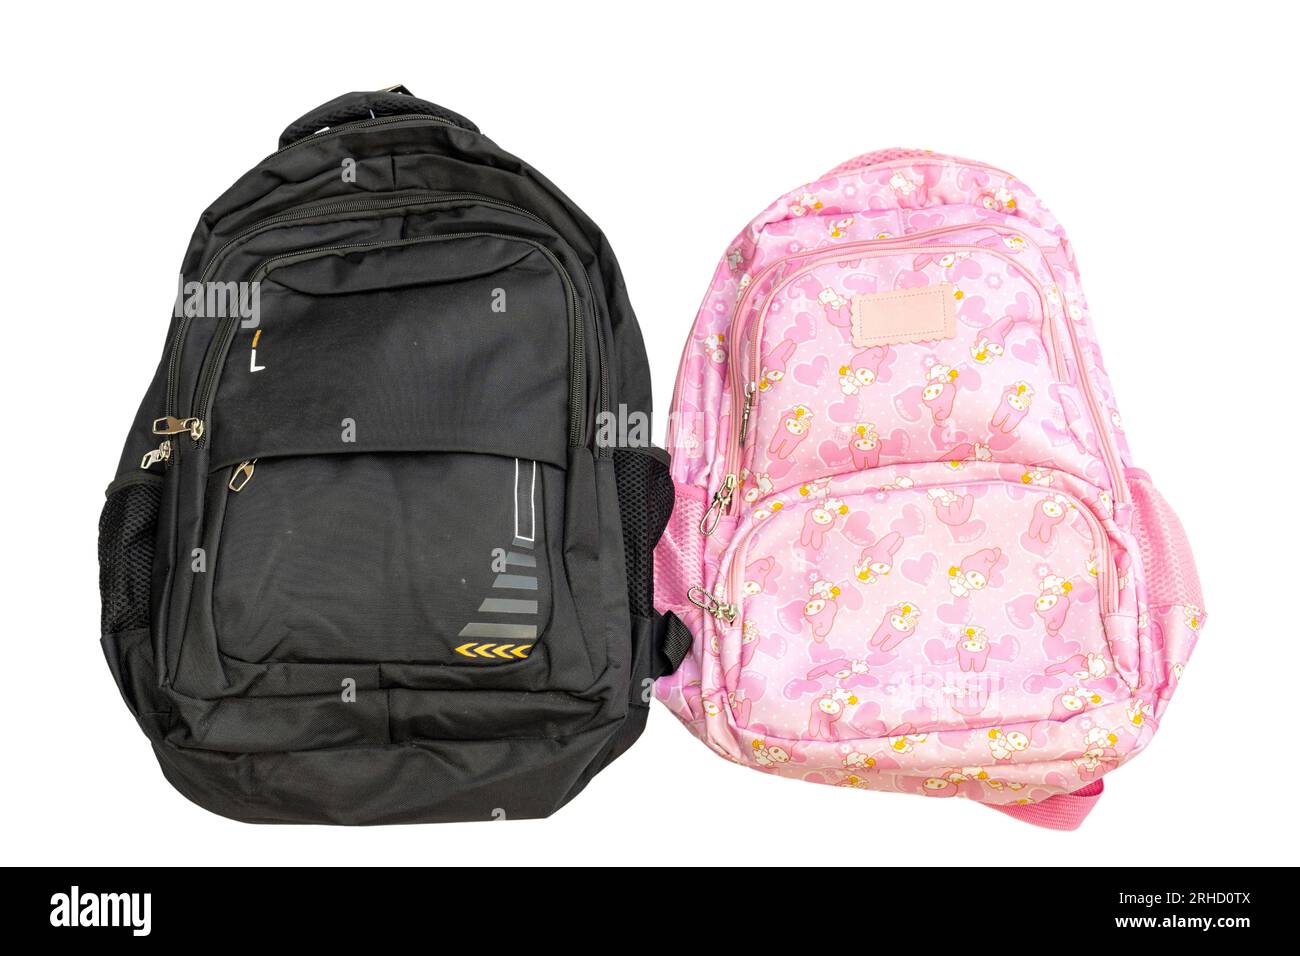 Black and Pink school bag on white isolated background. Boy and girl school bag set concept. Stock Photo